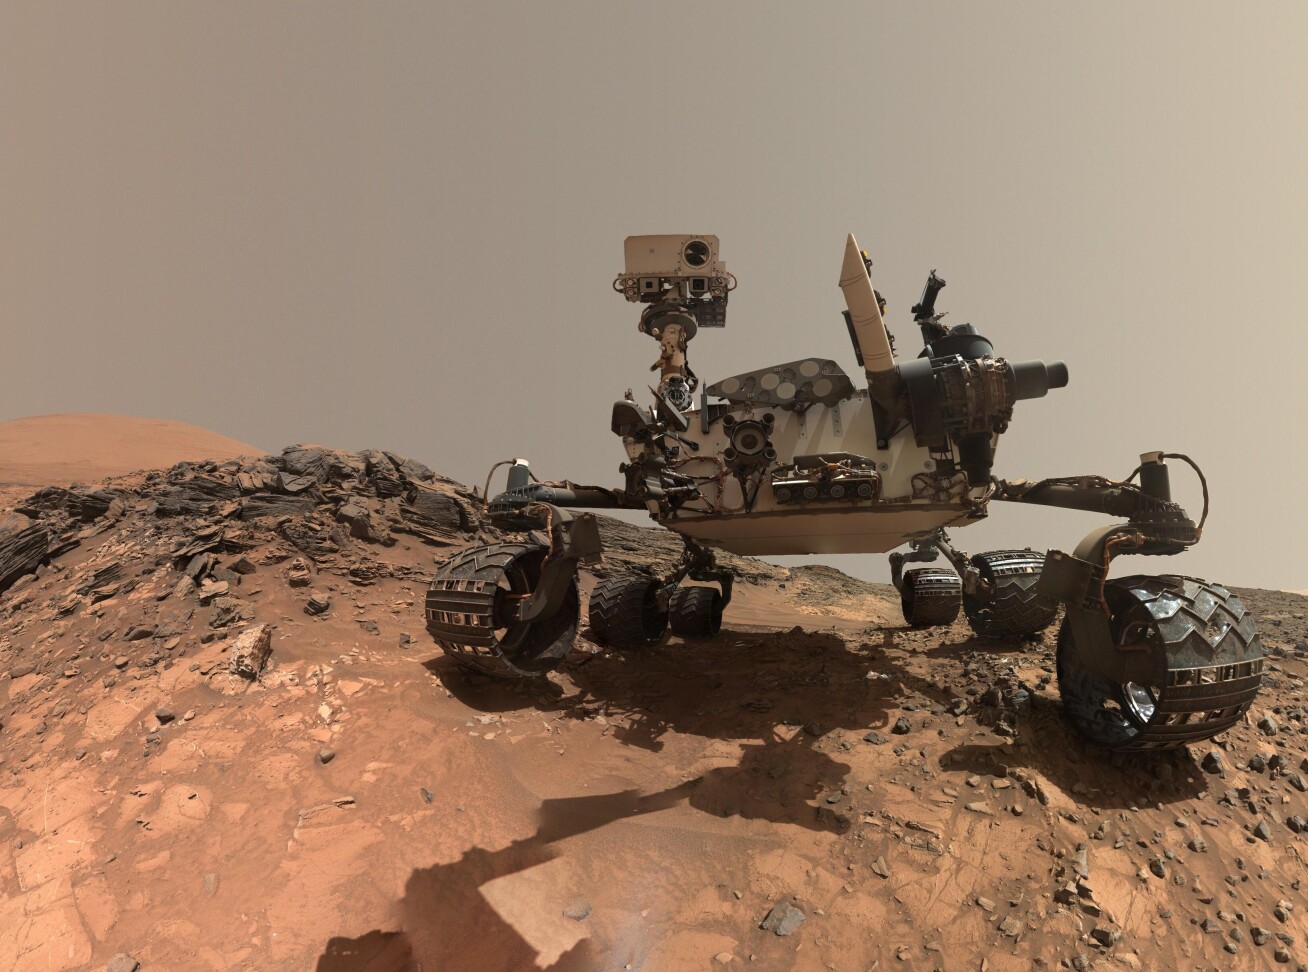 Photo of the Curiosity rover